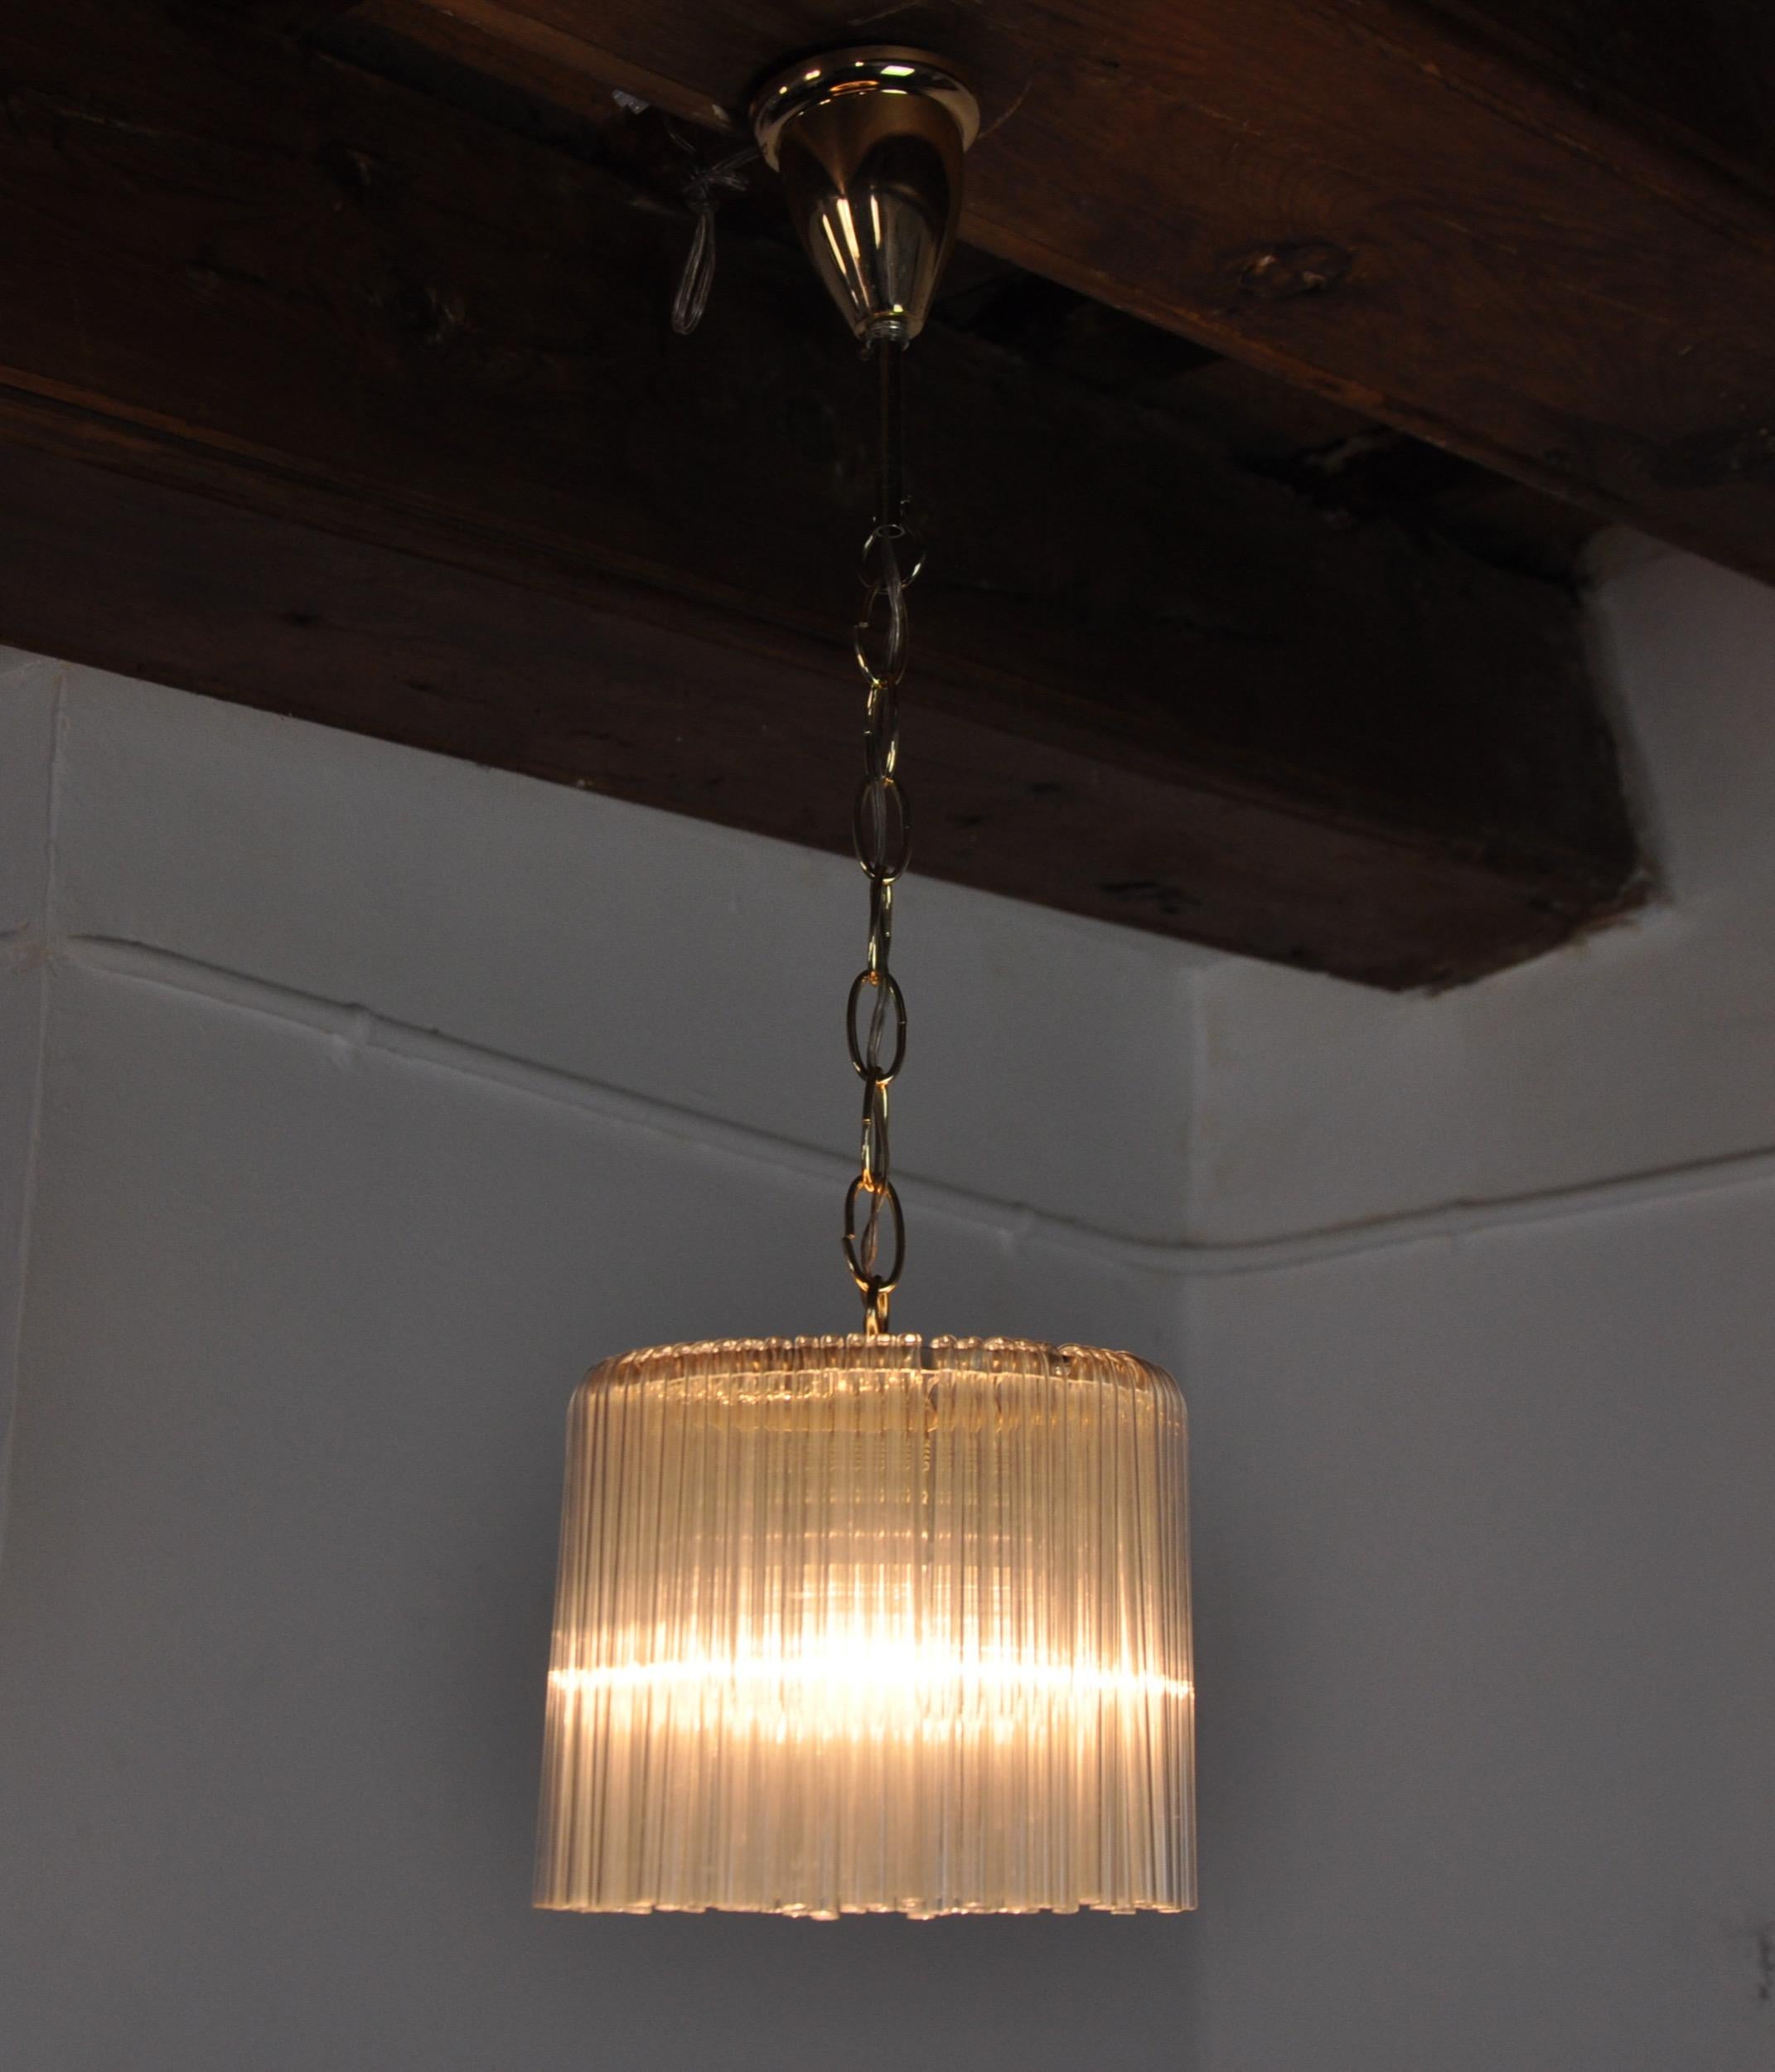 Very beautiful Venini pendant light produced in Italy in the 70s. Tubular glass and gold metal structure. Unique object that will illuminate wonderfully and bring a real designer touch to your interior. Electricity checked, time stamp consistent